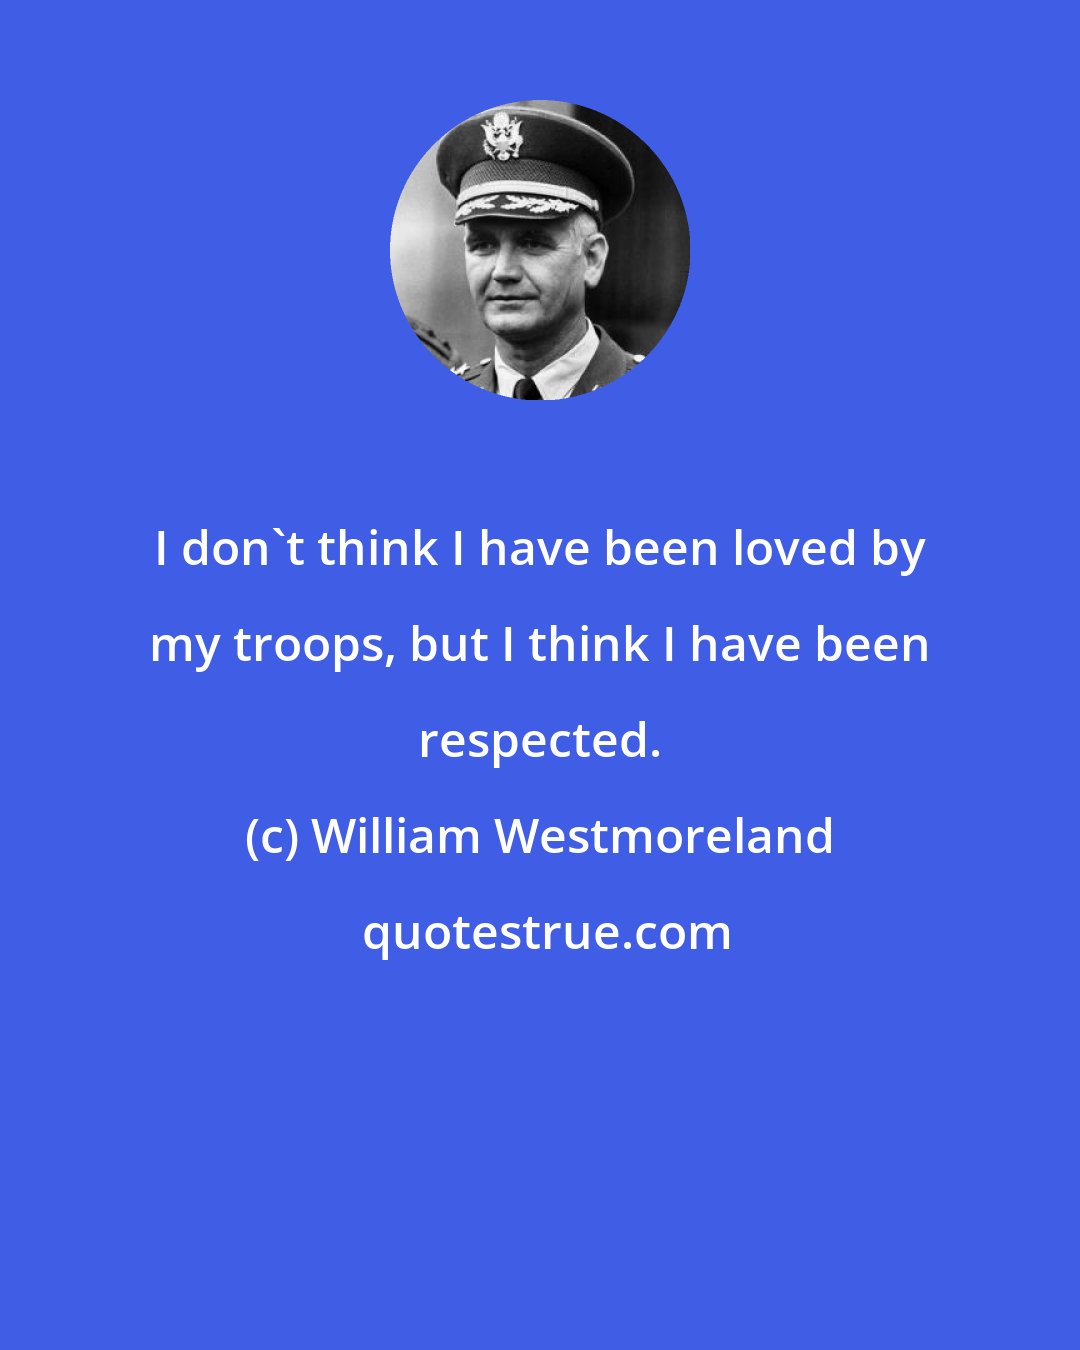 William Westmoreland: I don't think I have been loved by my troops, but I think I have been respected.